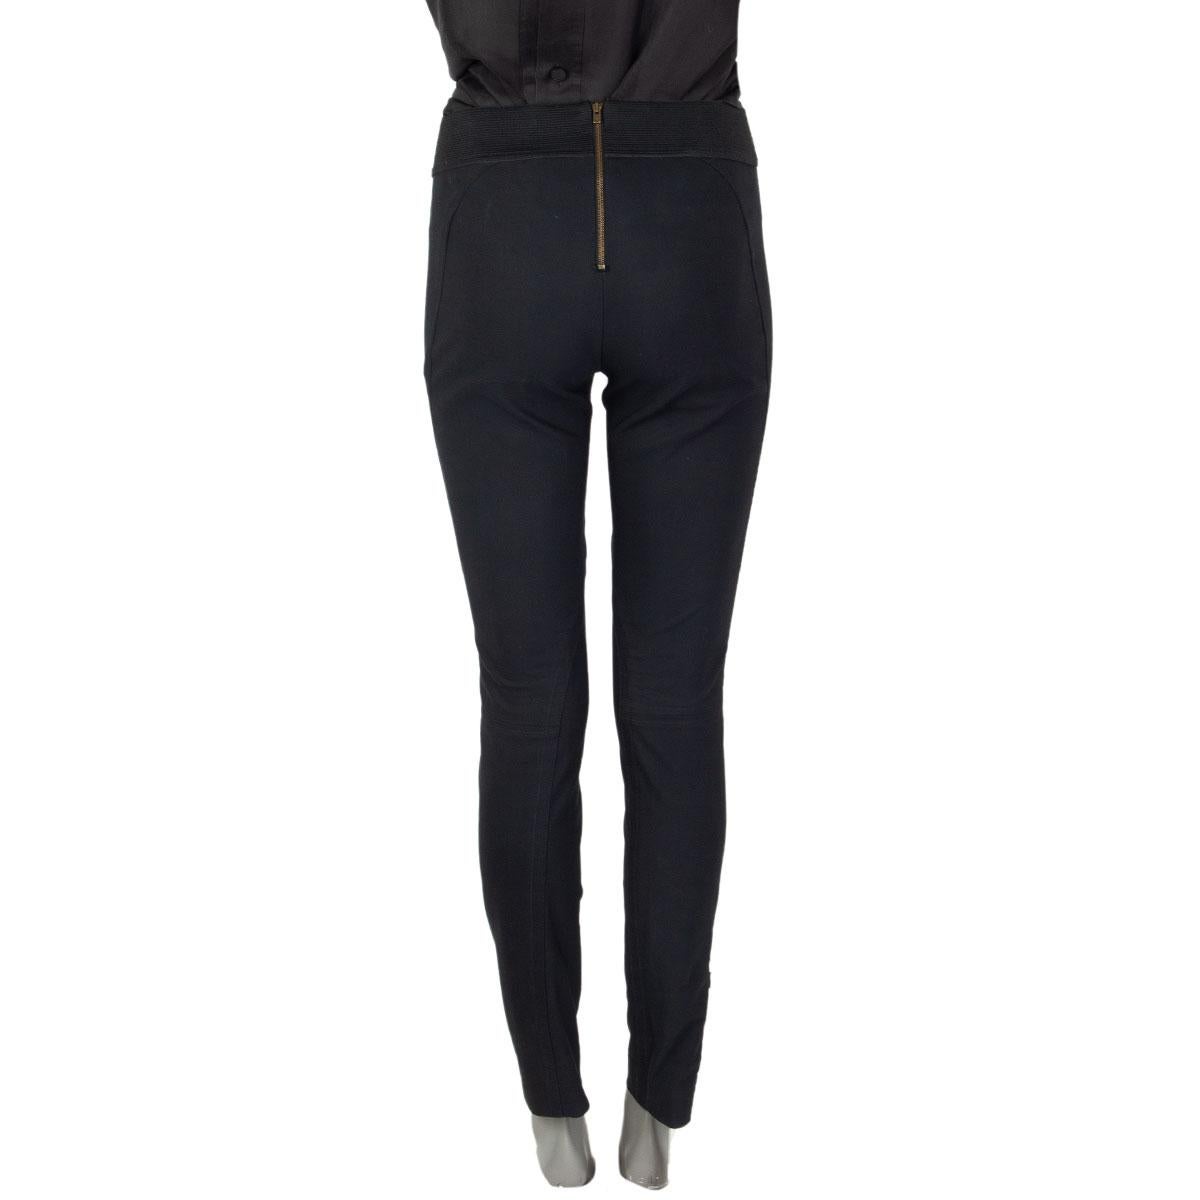 STELLA MCCARTNEY  black cotton blend SKINNY RIDING Pants 40 S In Excellent Condition For Sale In Zürich, CH